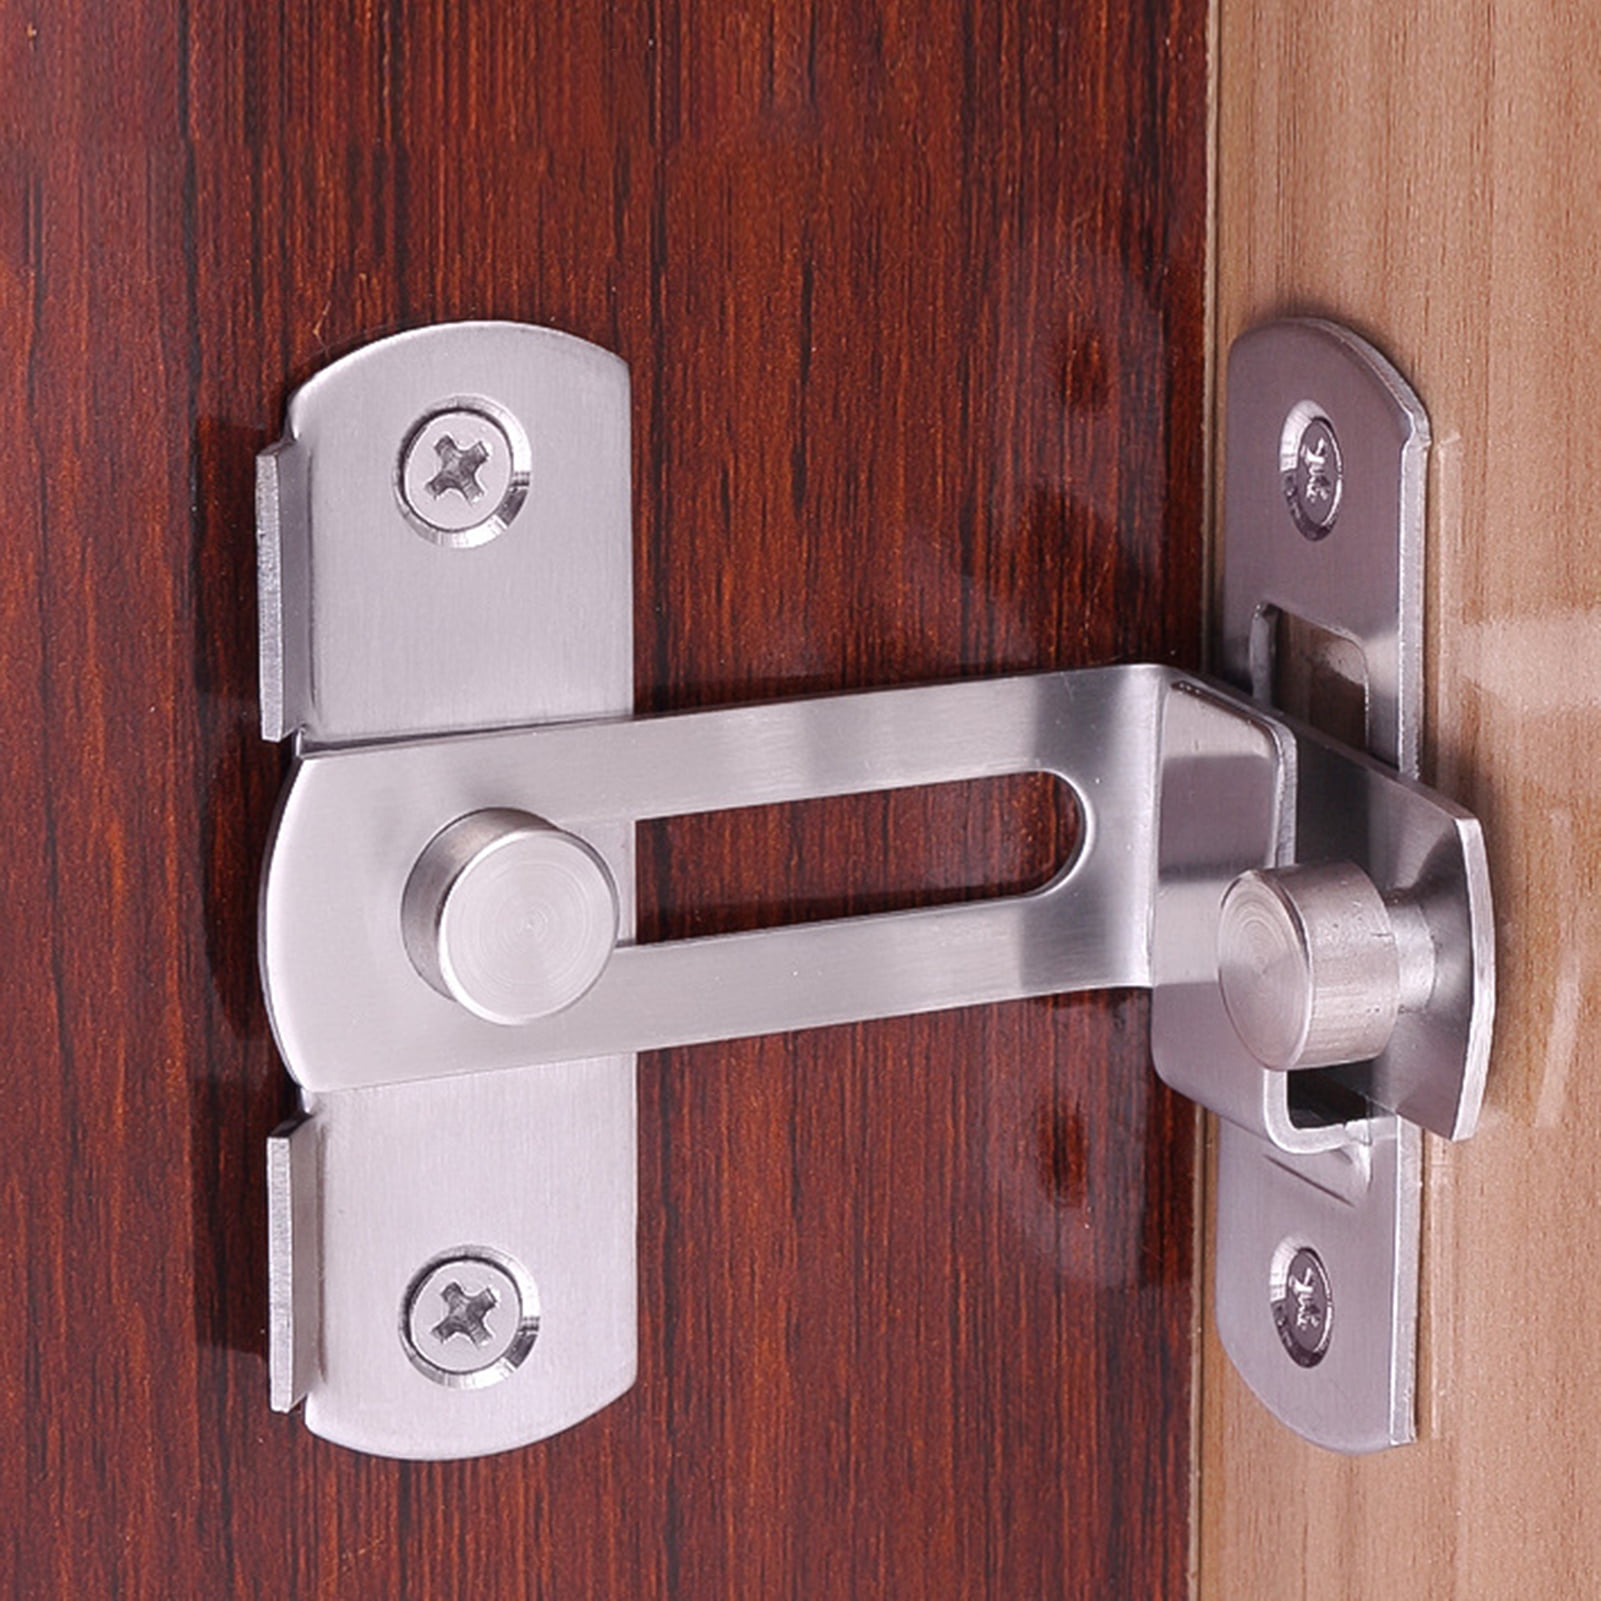 Details about   Toilet Shed Door Lock/Catch/Latch Shed Lock Hasp Latches Chain Locks Slide Bolt 